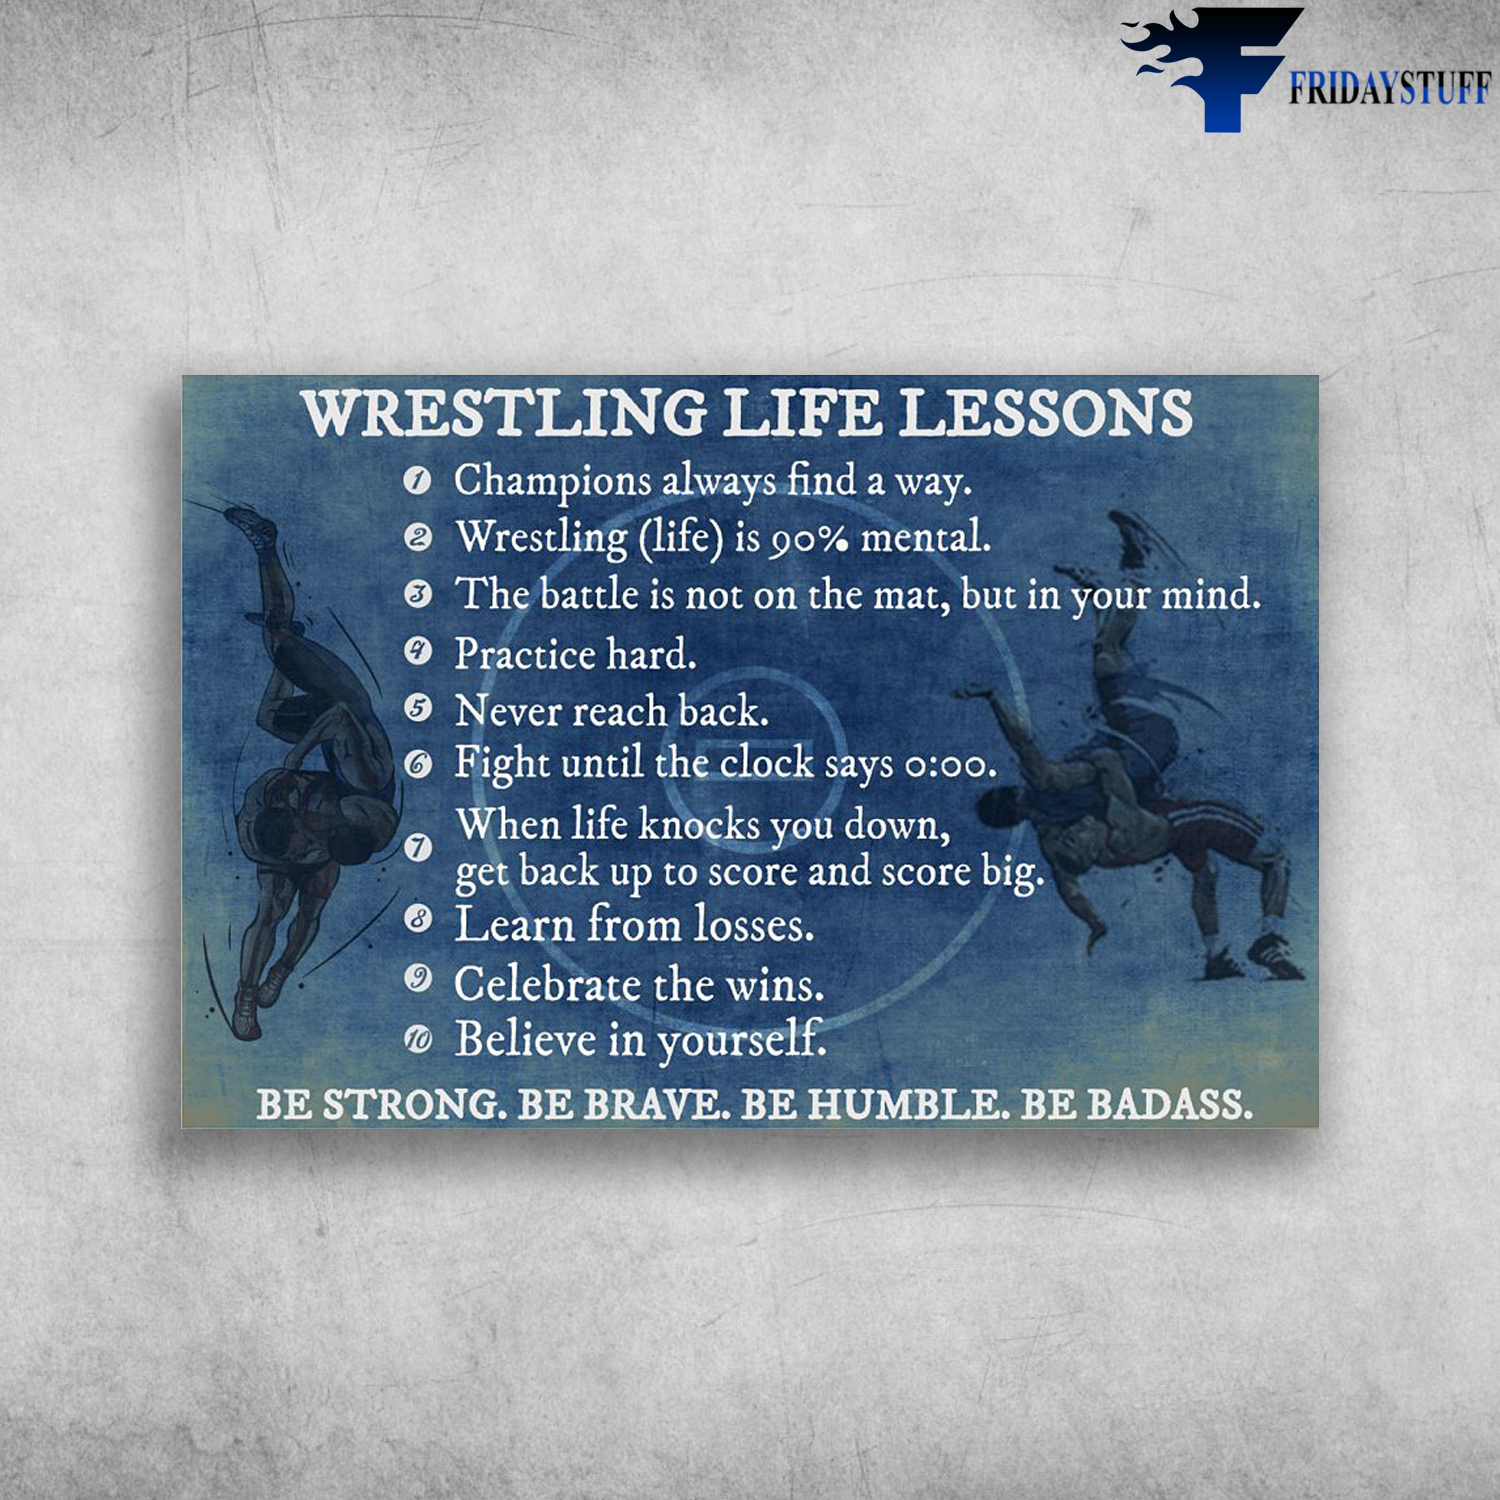 Wrestling File Lessons - Champions Always Find A Way, Wrestling Is 90% Mental, The Battle Is Not On The Mat, But In Your Mind, Practice Hard, Never Reach Back, Fight Until The Clock Says 0.00, When Life Knocks You Down